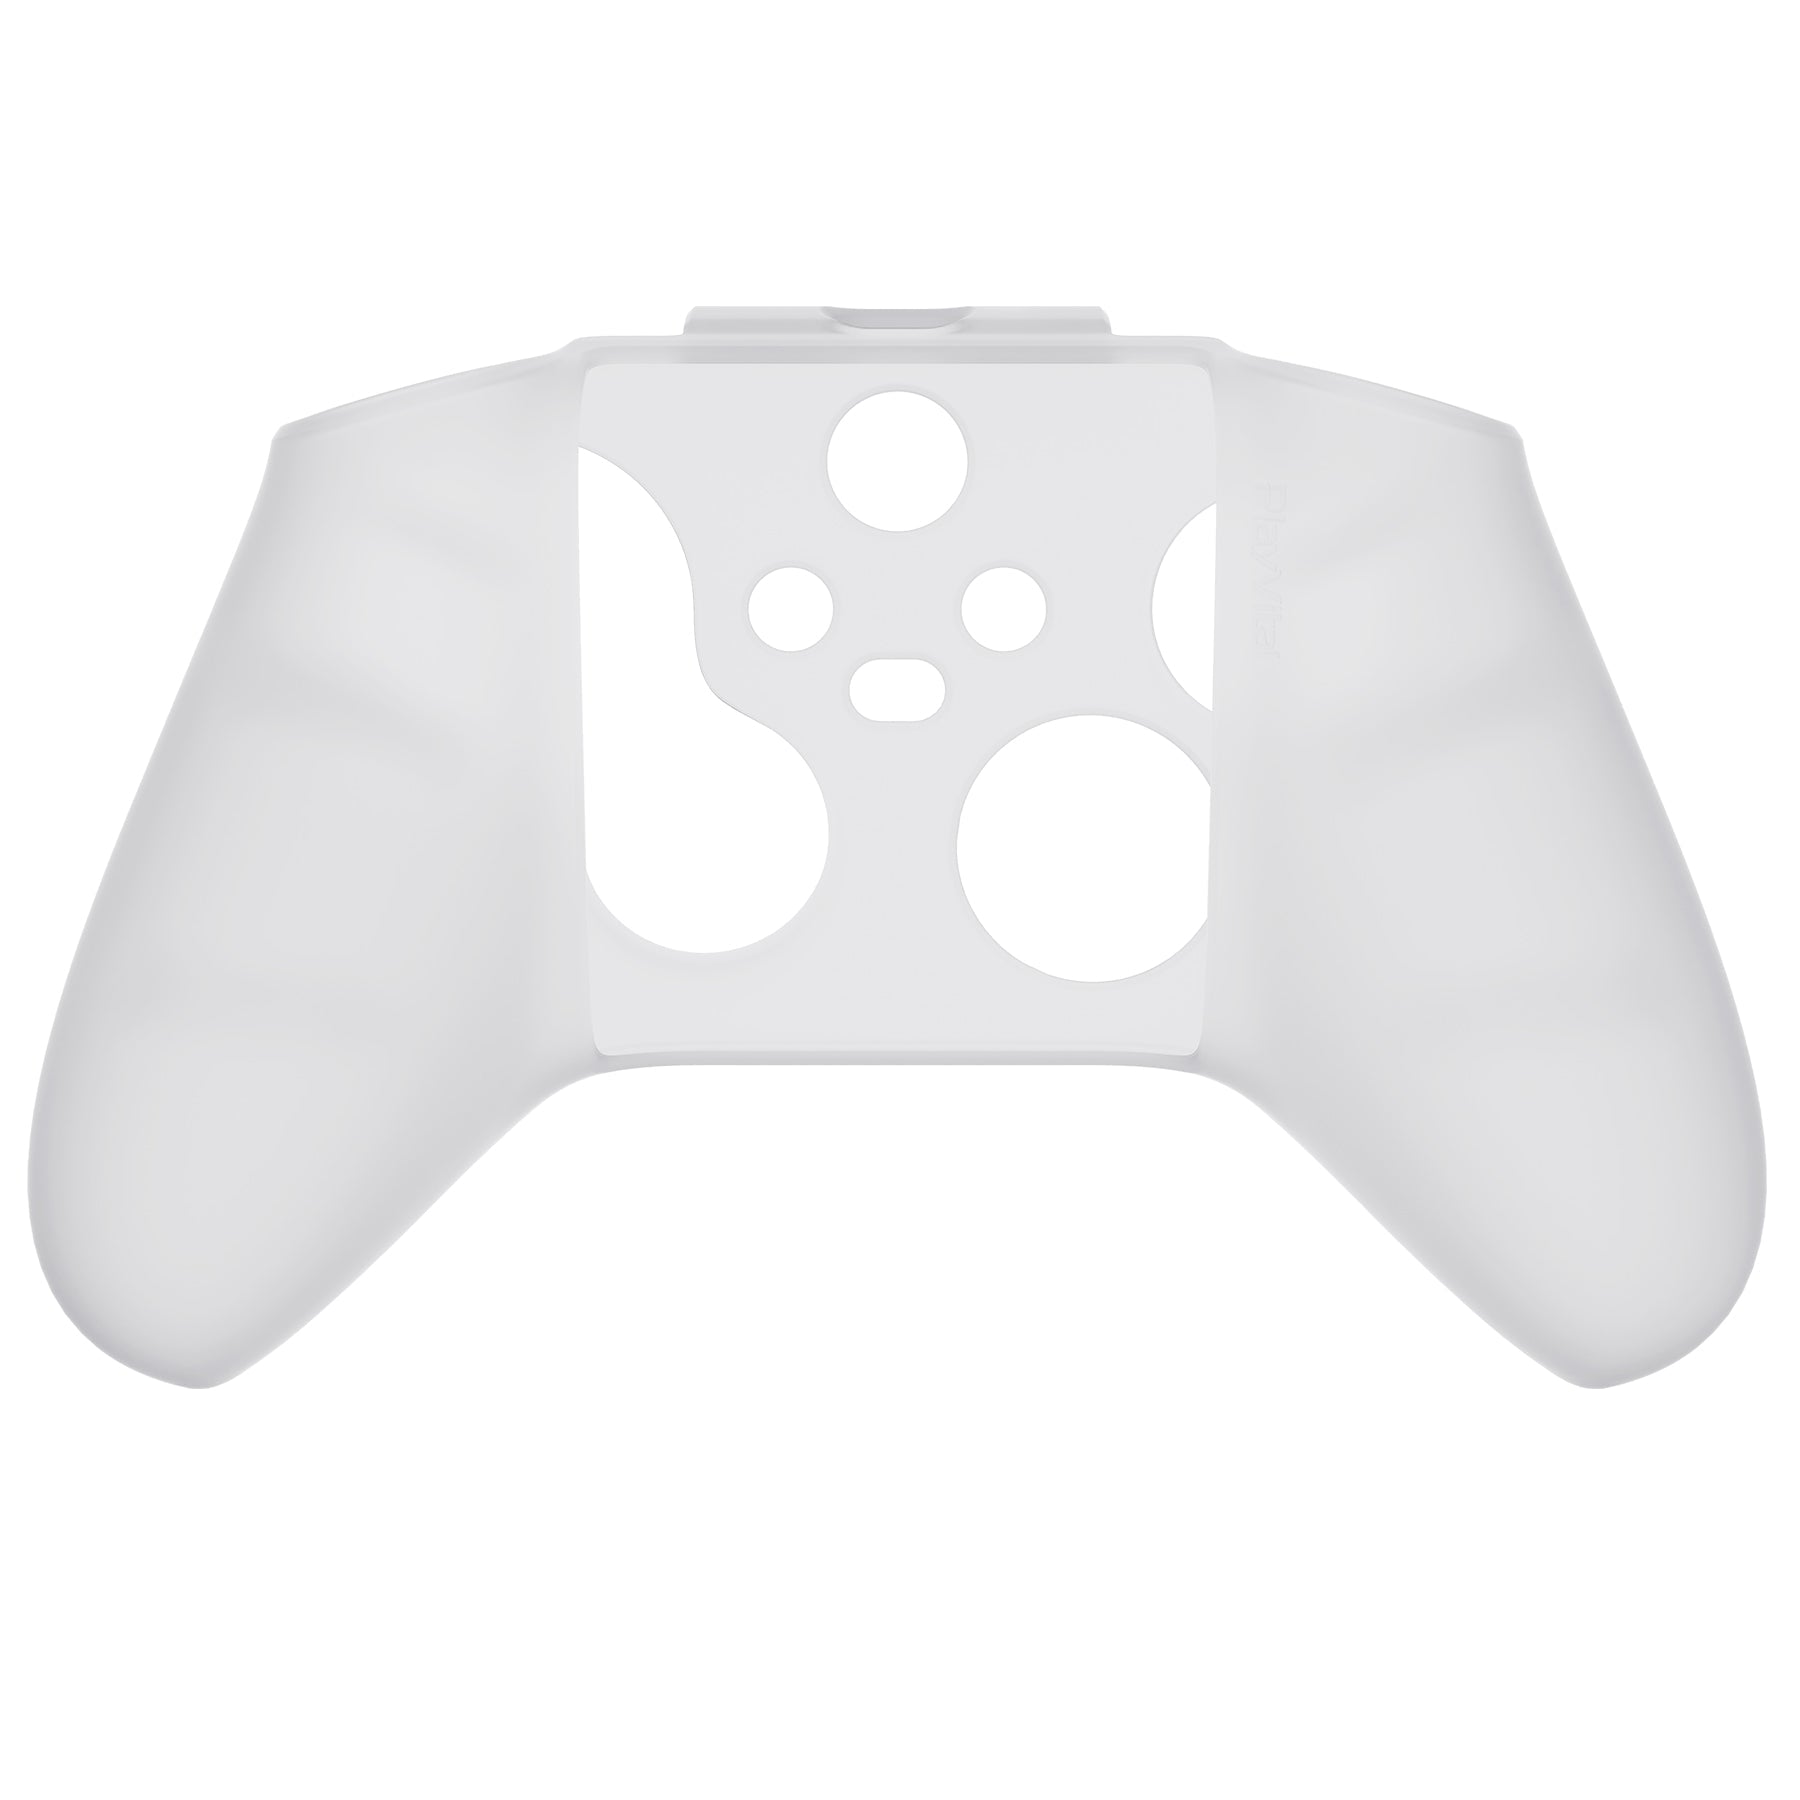 PlayVital Transparent Clear White Pure Series Anti-Slip Silicone Cover Skin for Xbox Series X/S Controller, Soft Rubber Case Protector for Xbox Series X/S Controller with Clear White Thumb Grip Caps - BLX3016 PlayVital